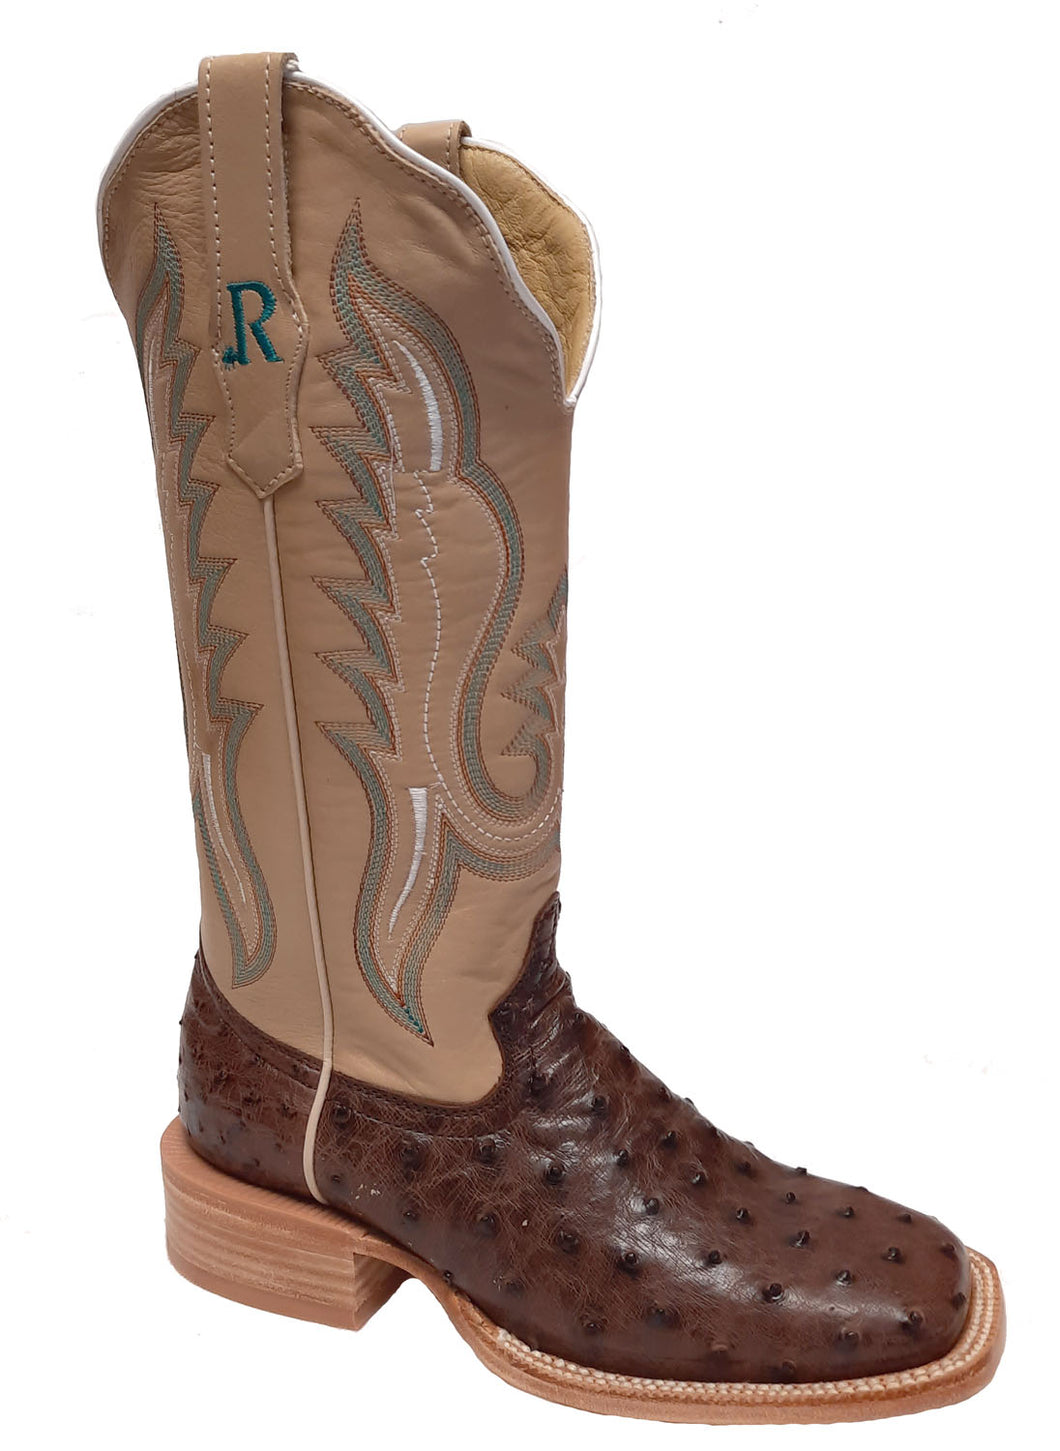 Pard's Western Shop Kango Tobac Bruciato Full Quill Ostrich Boots for Women from R.Watson Boots